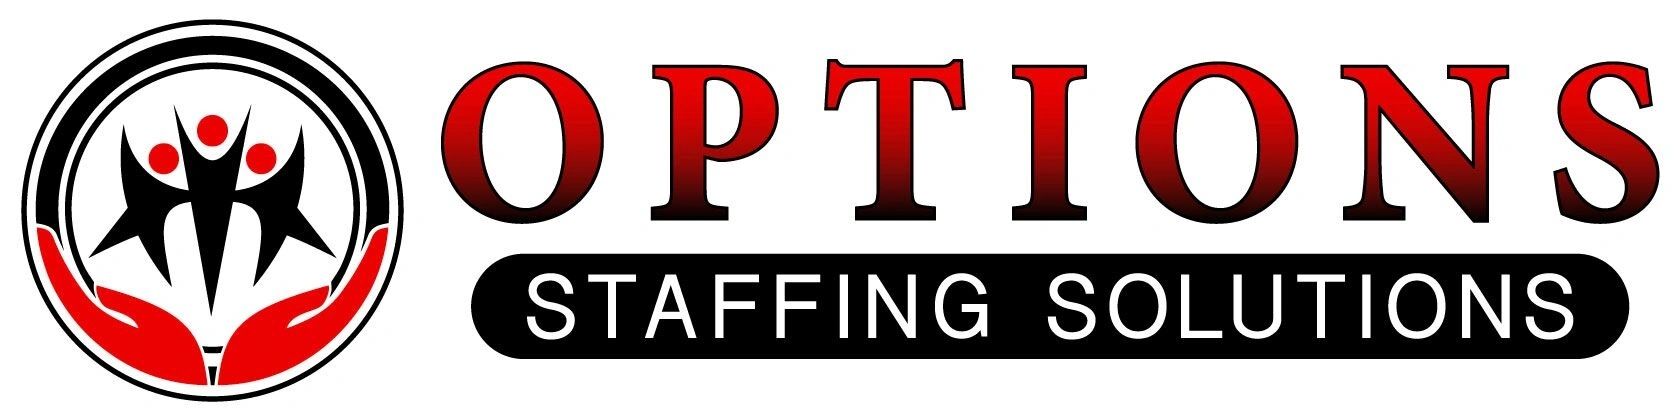 Options Staffing Solutions logo